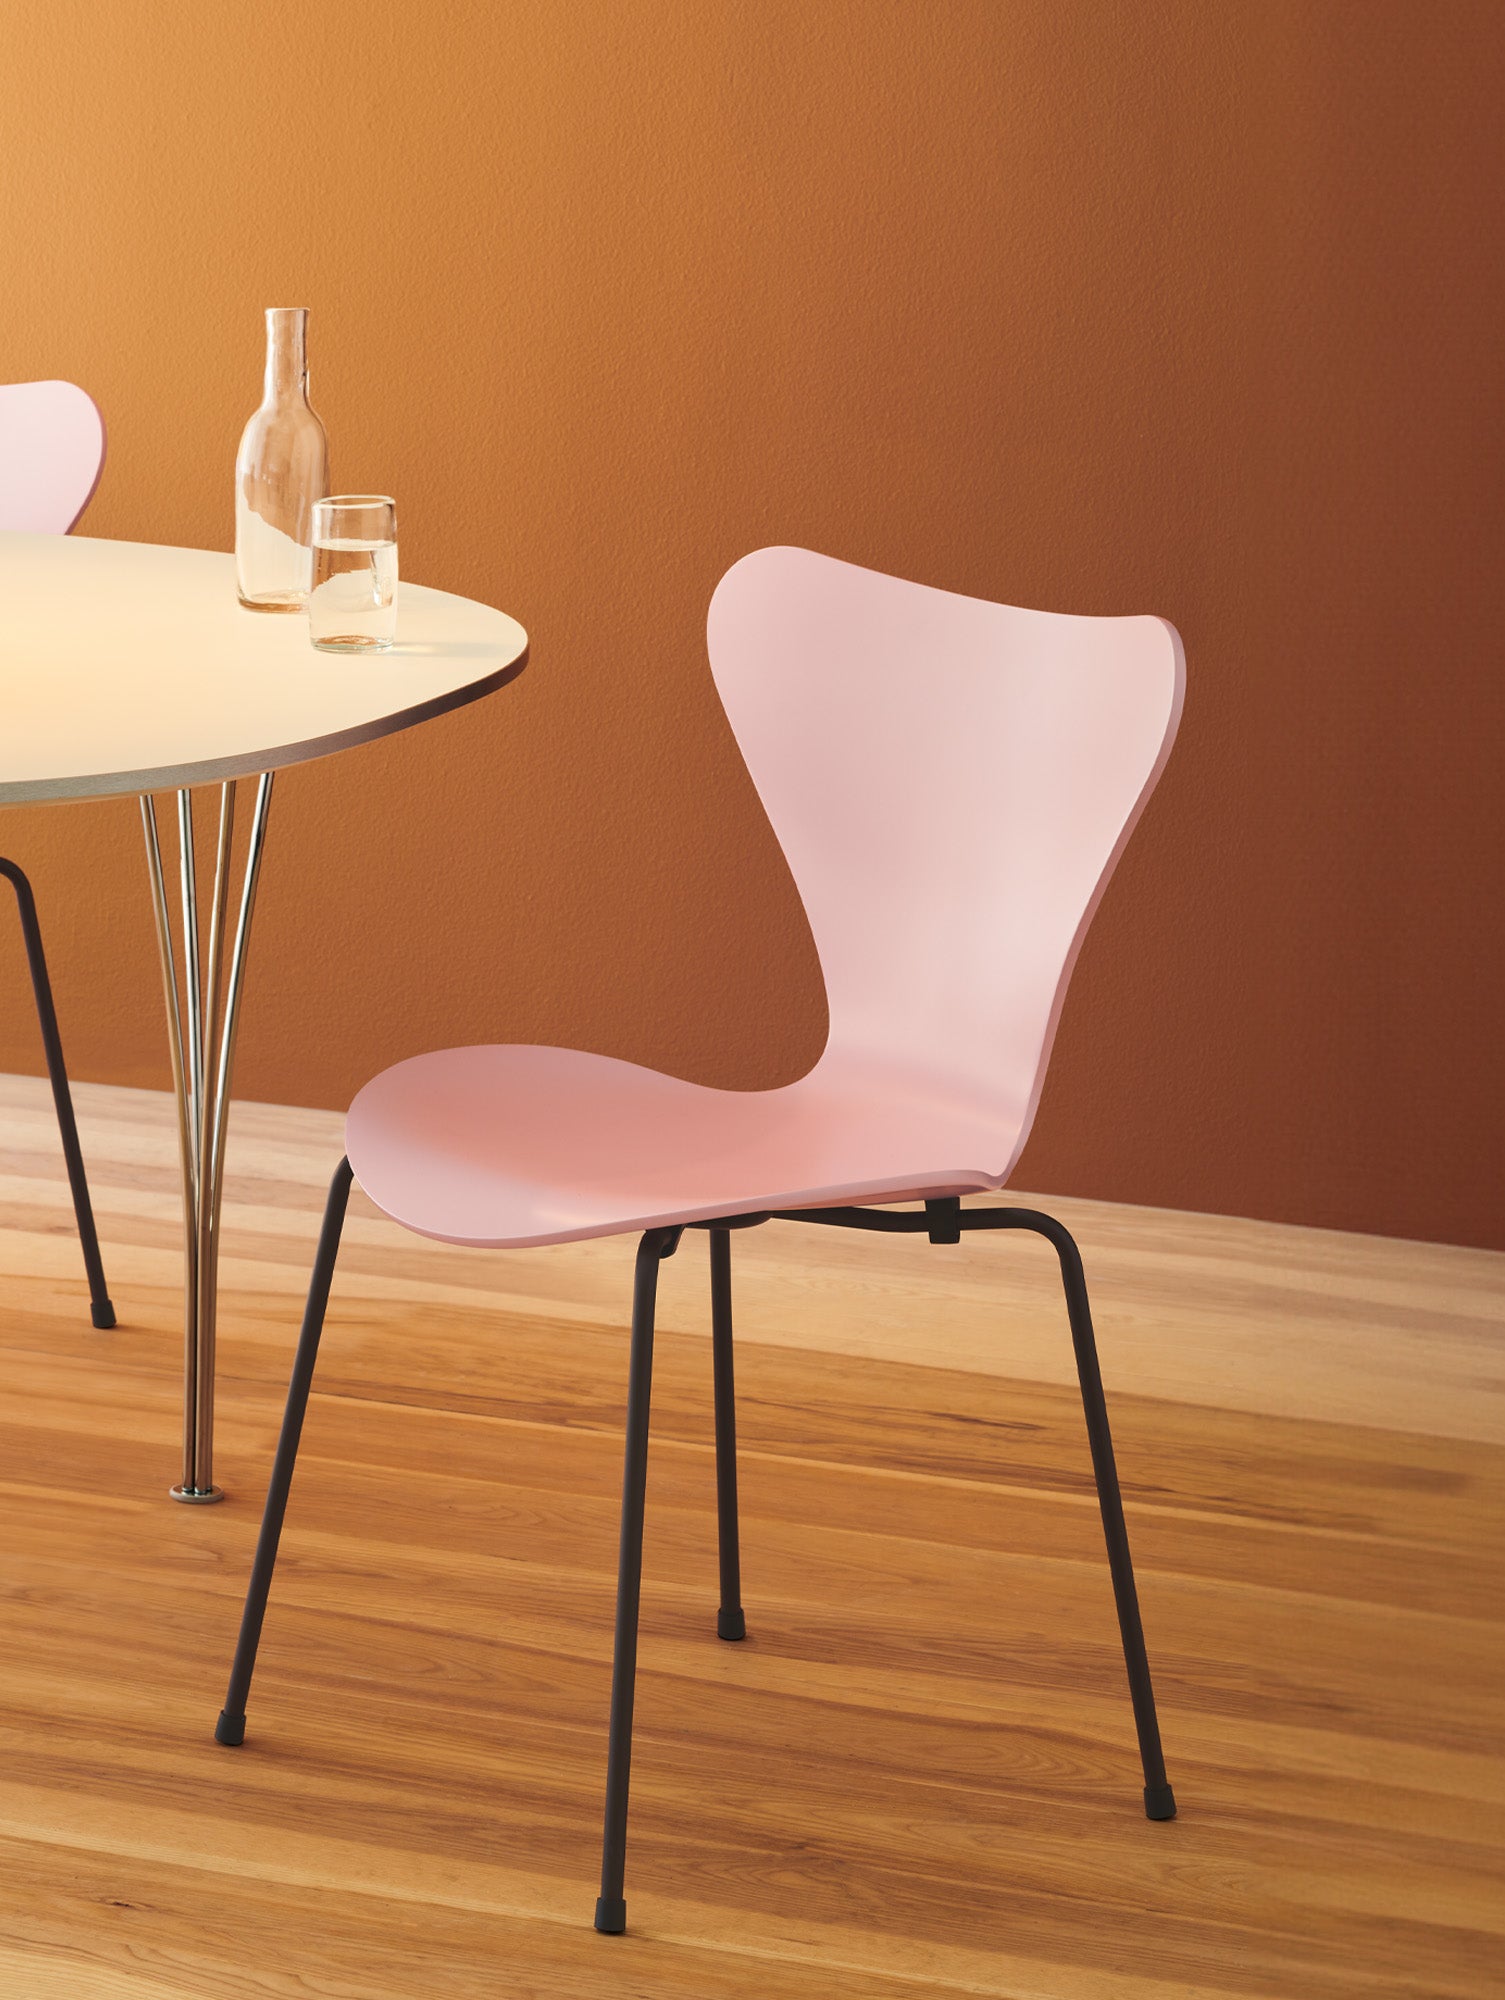 Series 7™ 3107 Dining Chair by Fritz Hansen - Pale Rose